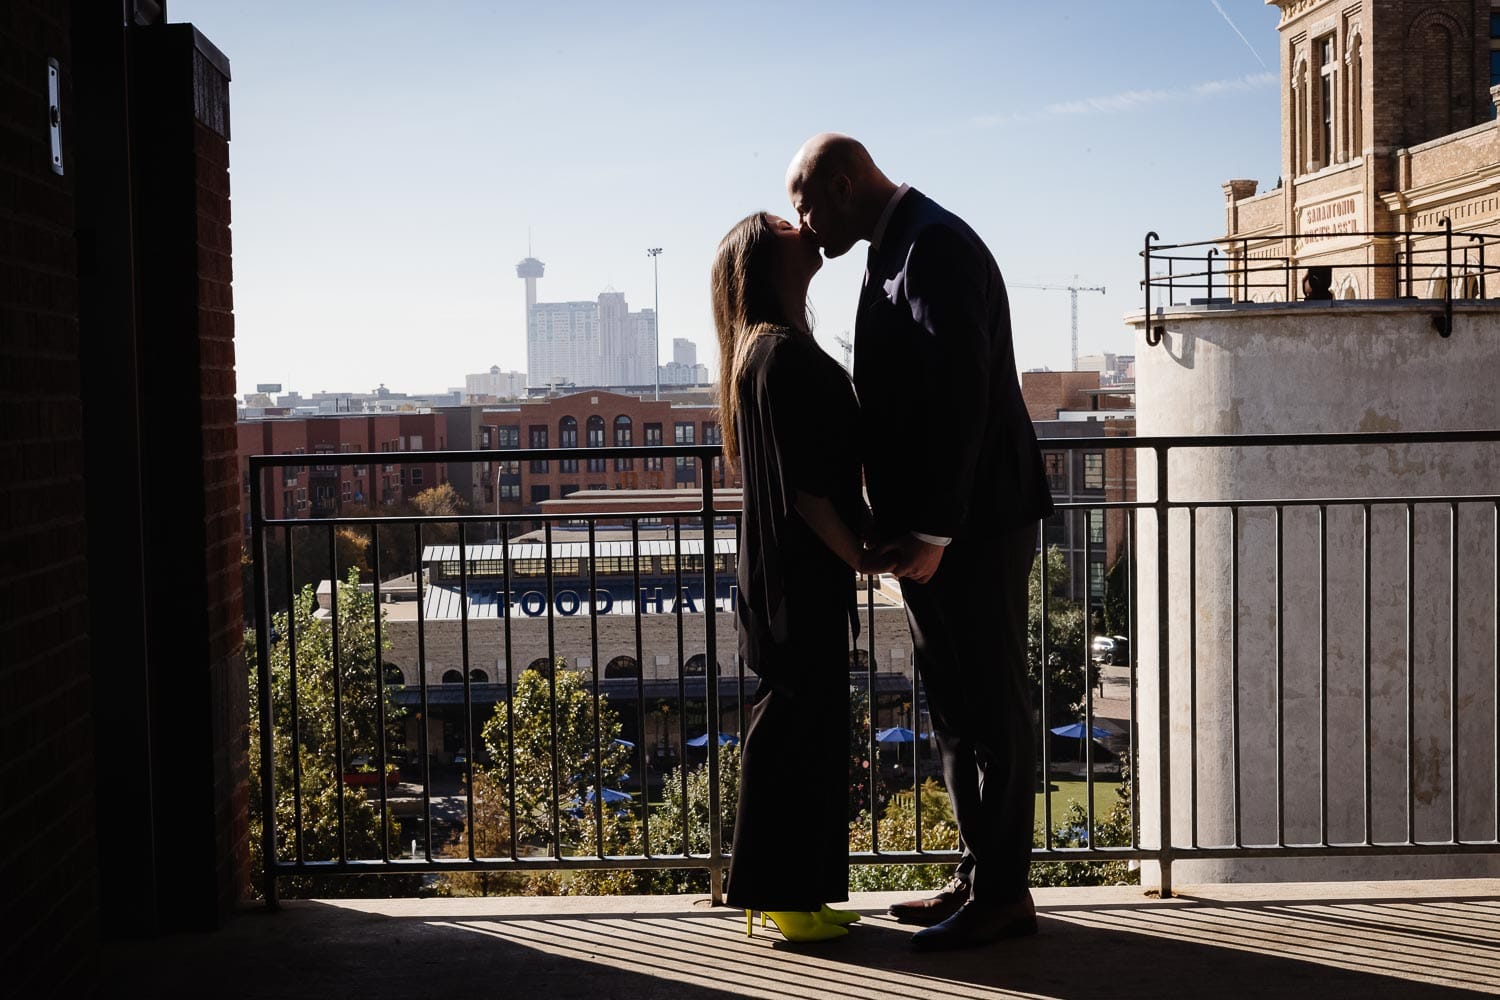 In a parking lot with view of downtown San Antonio skyline engagement shoot